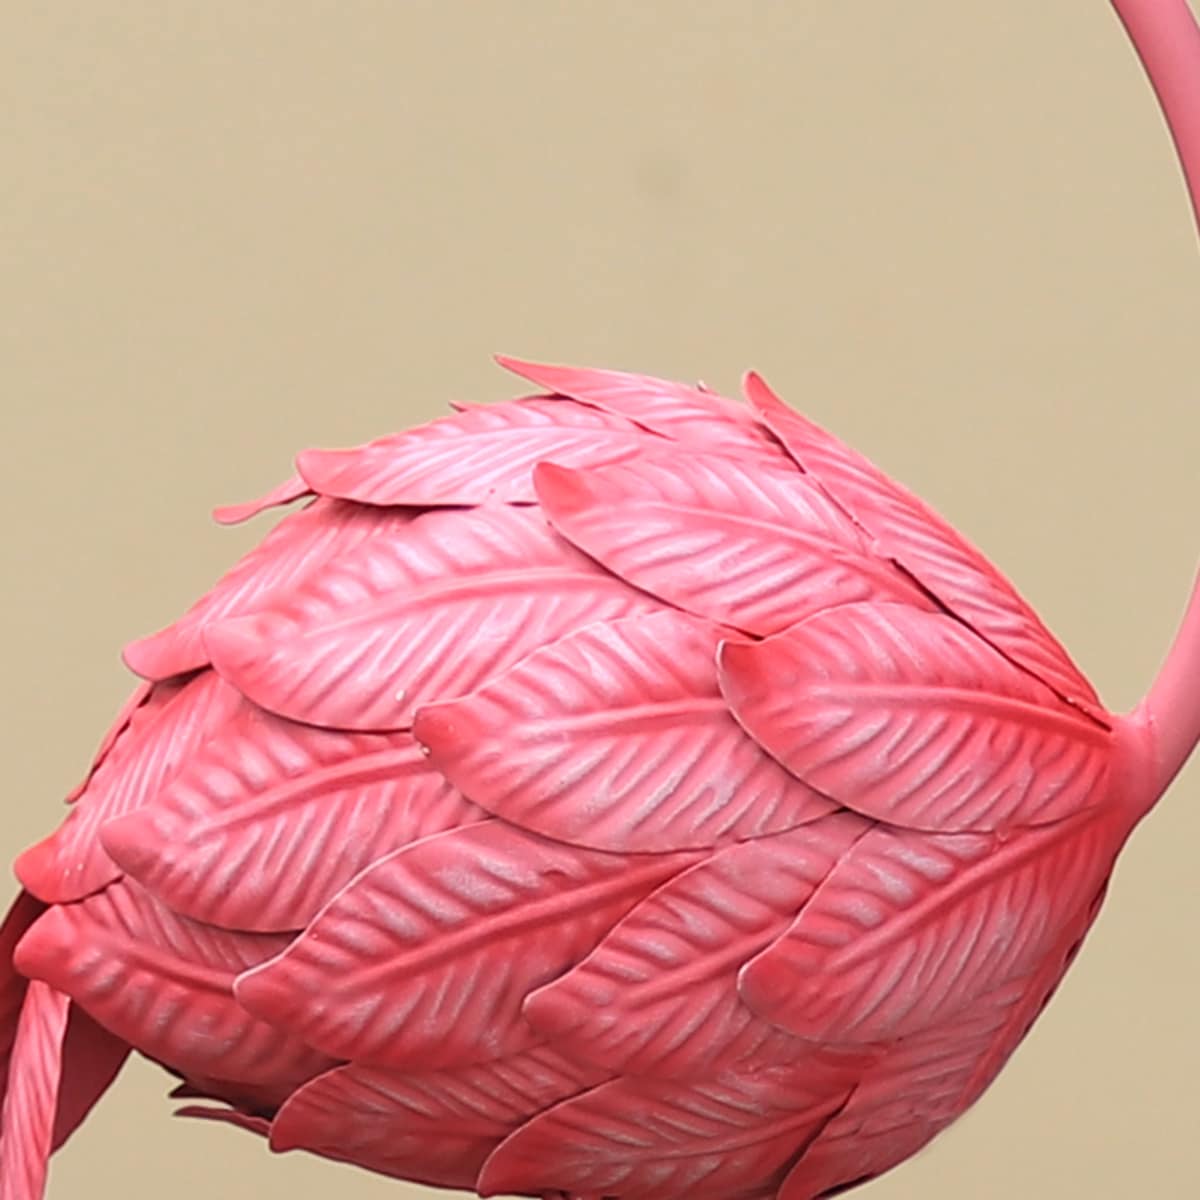 Pink Twine Springy Head Flamingo Sculpture 19 inch, One Size - Ralphs